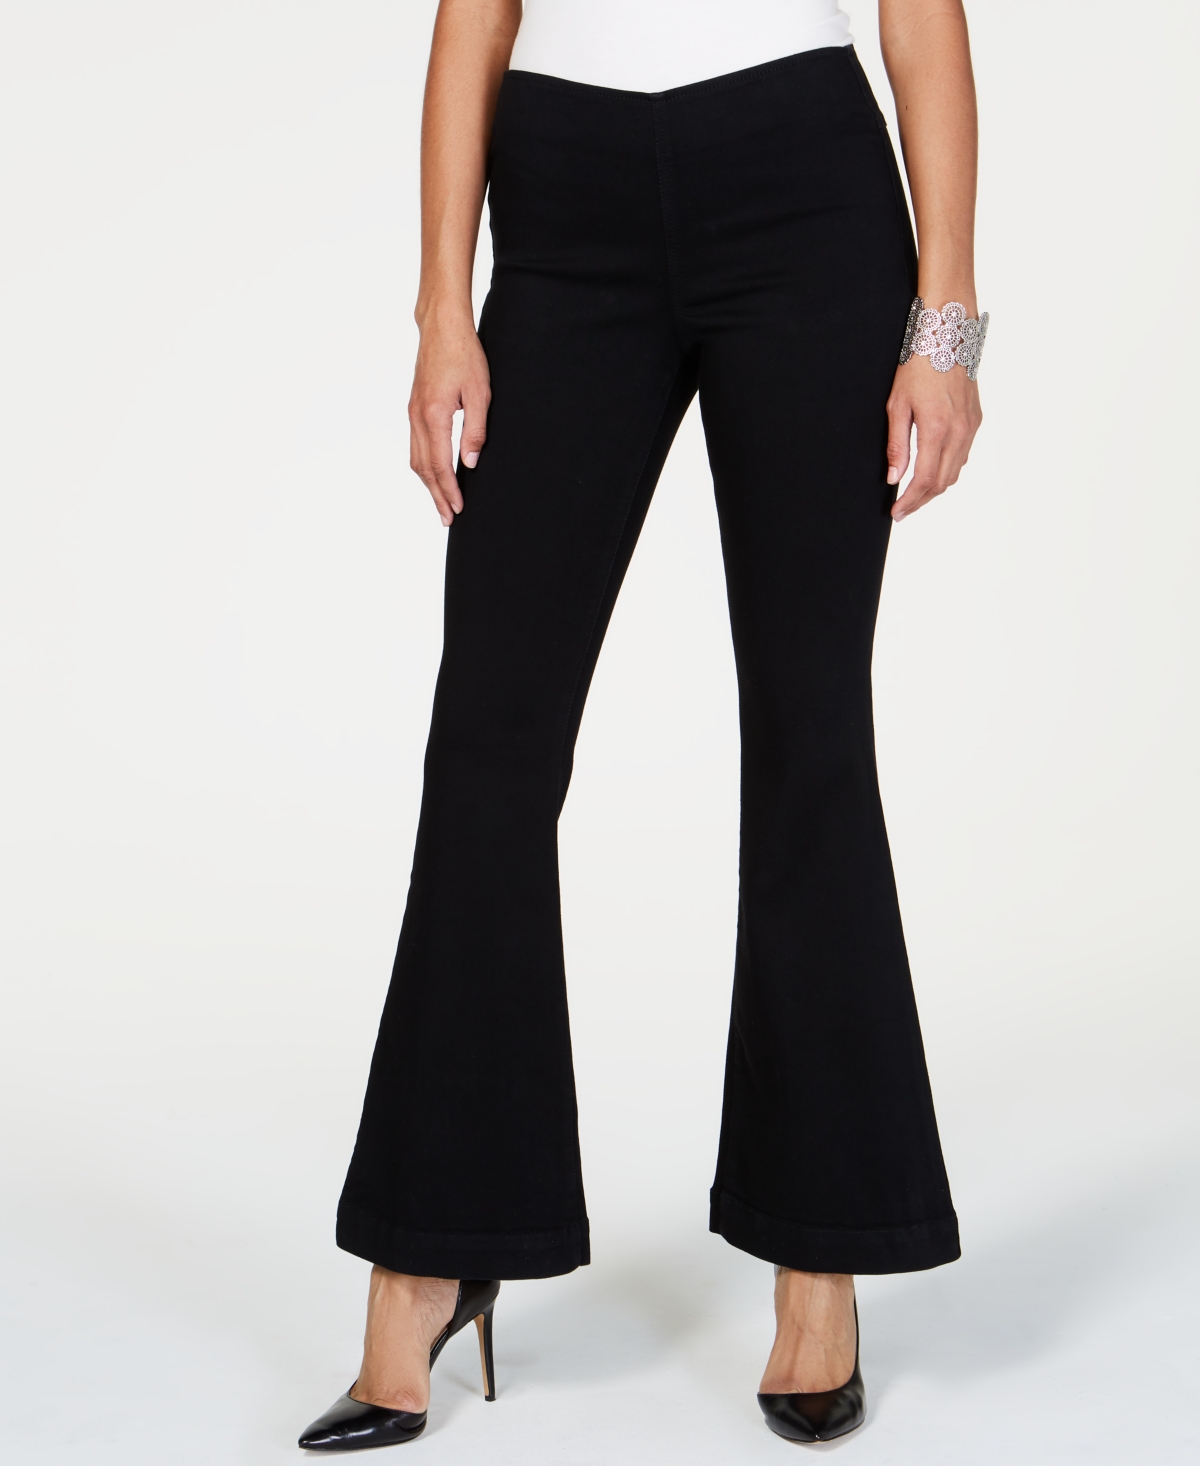  Inc International Concepts Pull-On Flare Jeans, Created for Macy's